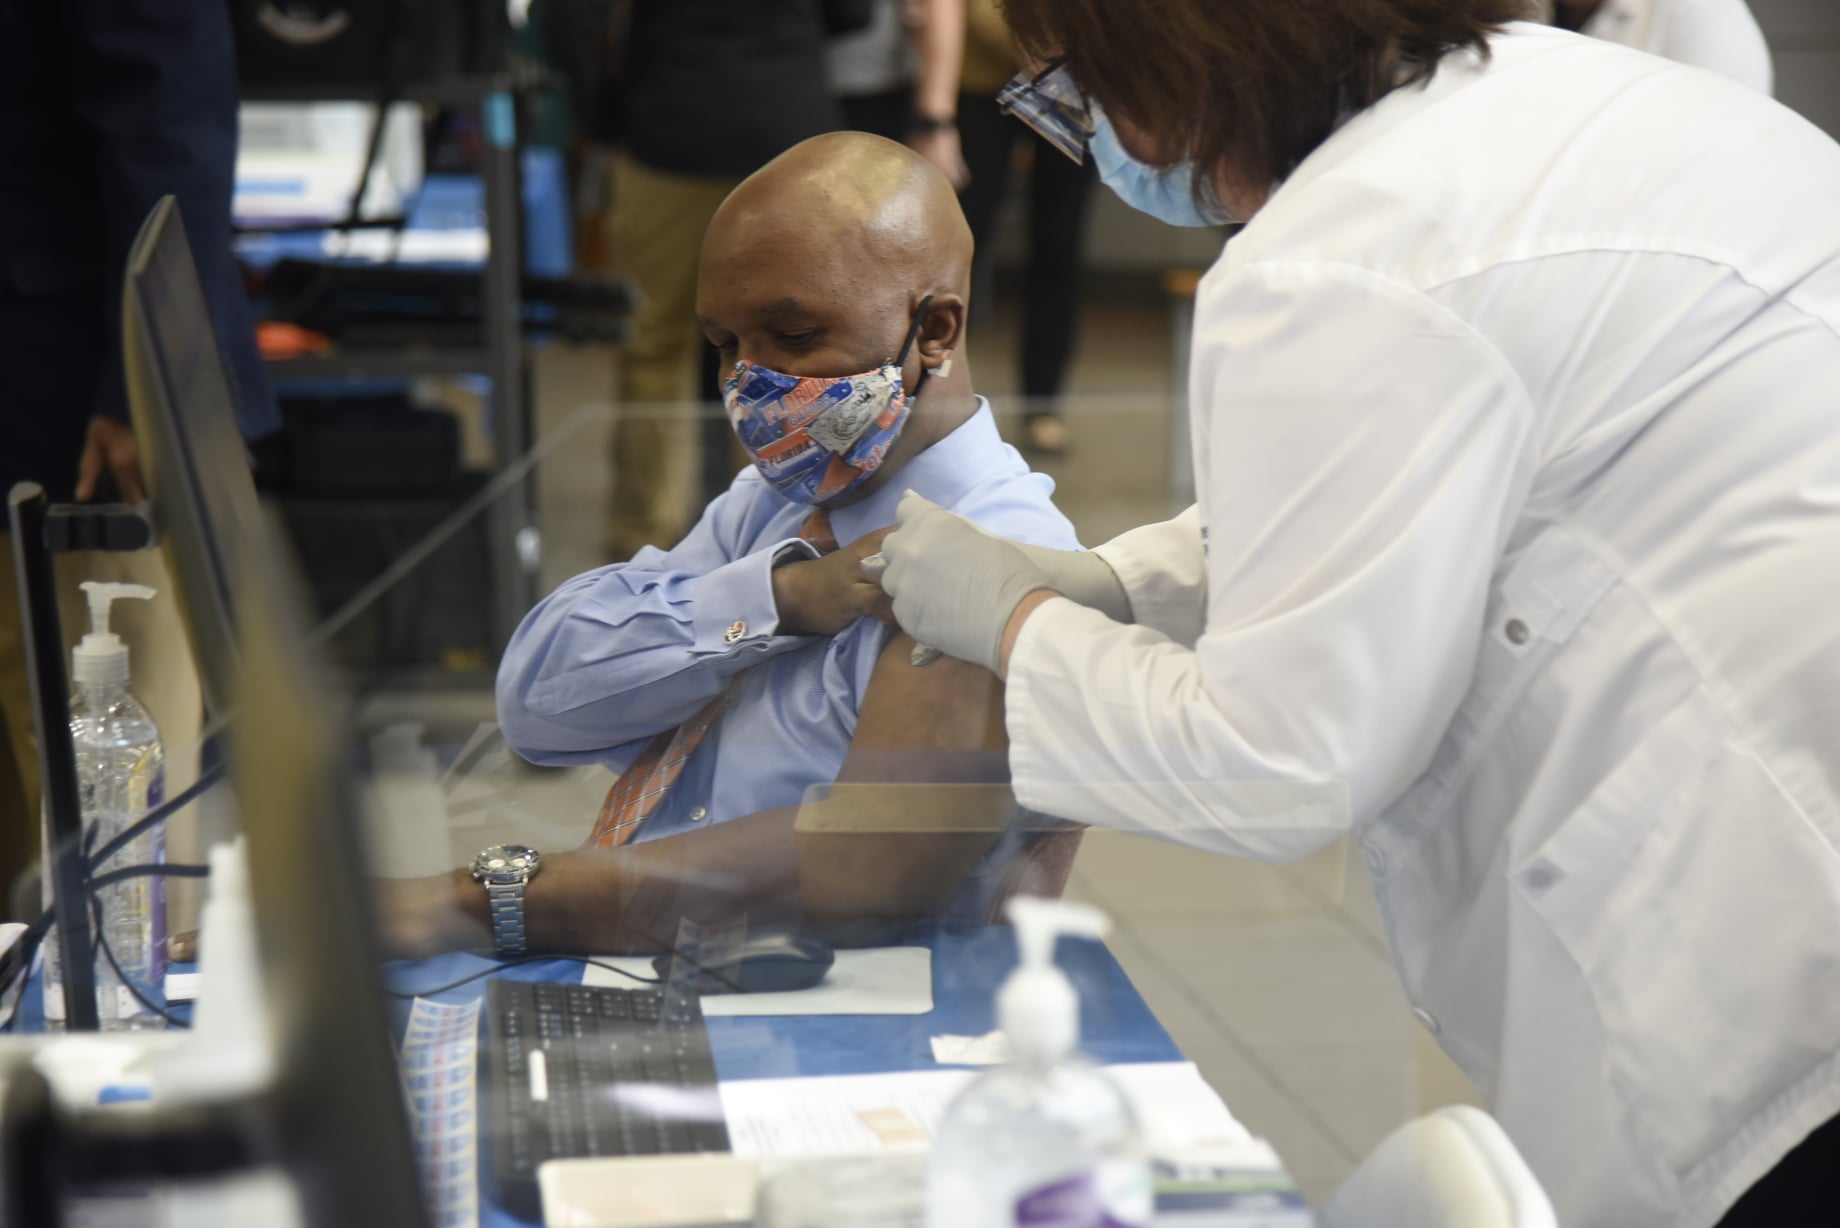 PHOTO: Dr. Leon Haley Jr., seen here on Dec. 14, 2020, is believed to be the first person in Florida to have gotten the COVID-19 vaccine.